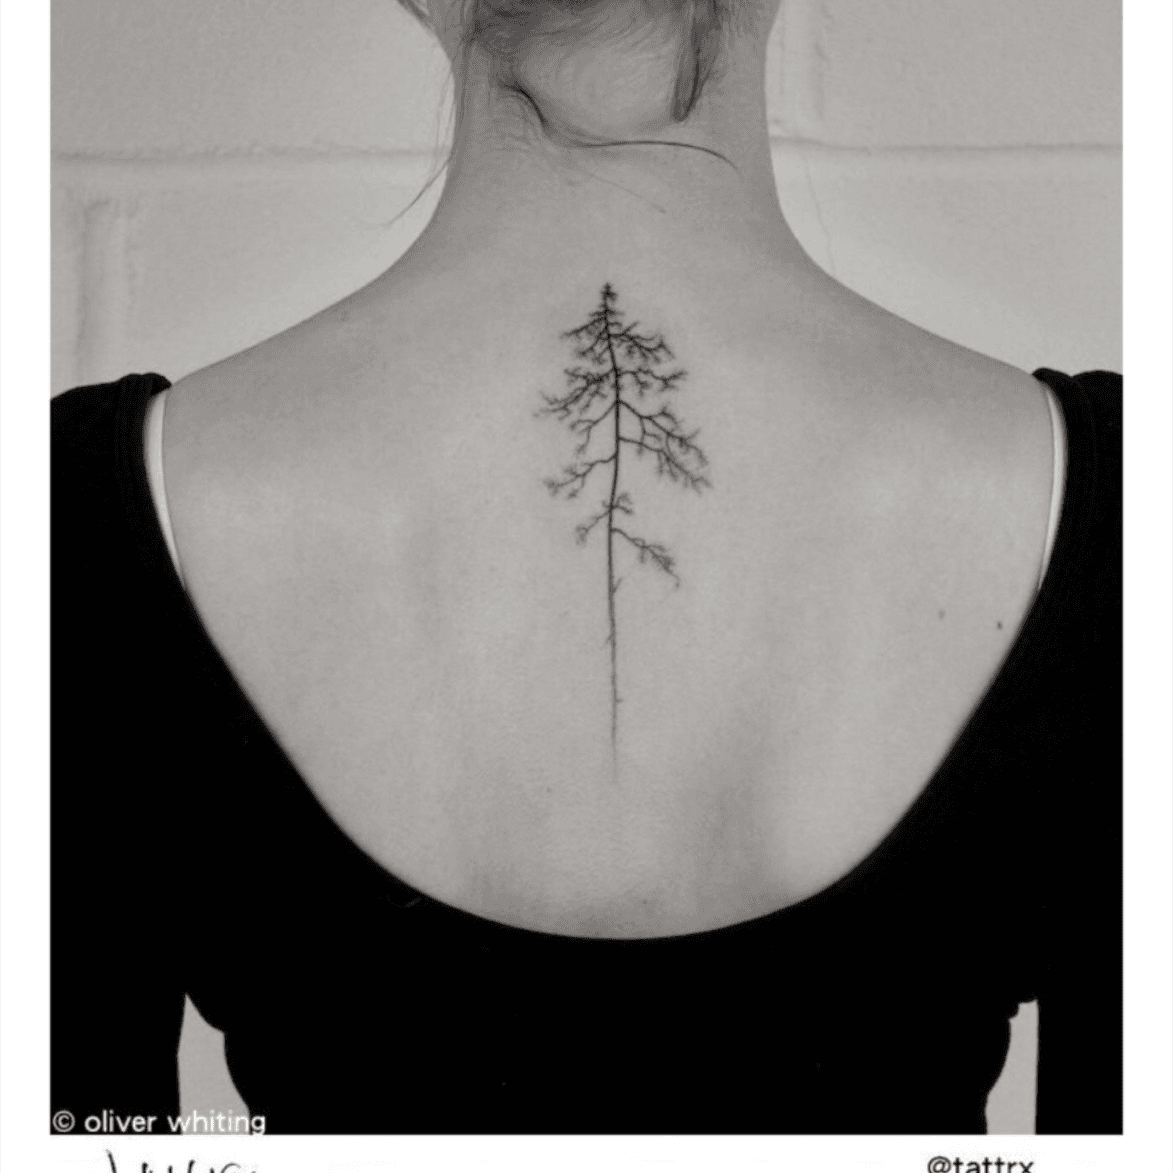  80 Best Olive Tree and Branch Tattoo Designs  Meaning and Ideas